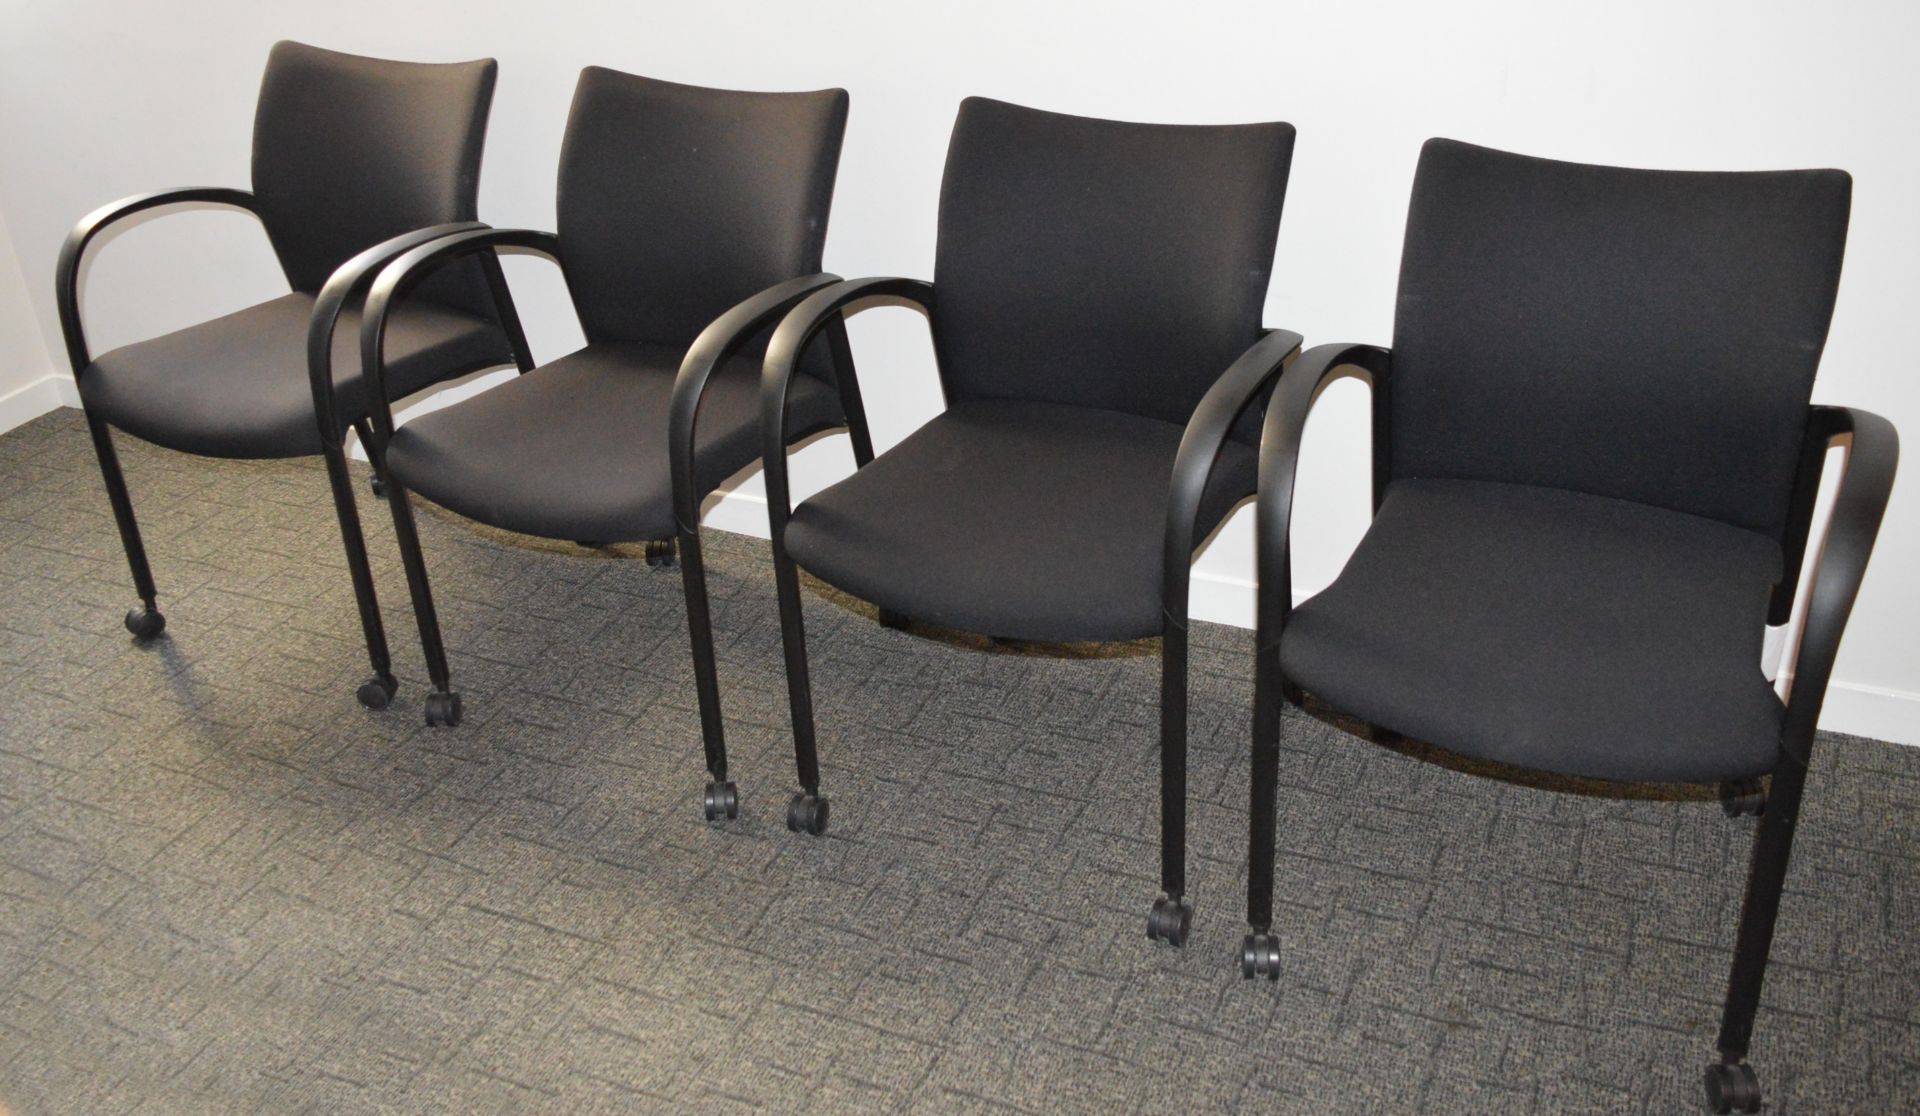 4 x Senator T117A Havana Extreme Office Chairs - Fully Upholstered With Black Frame, Arm Rests and